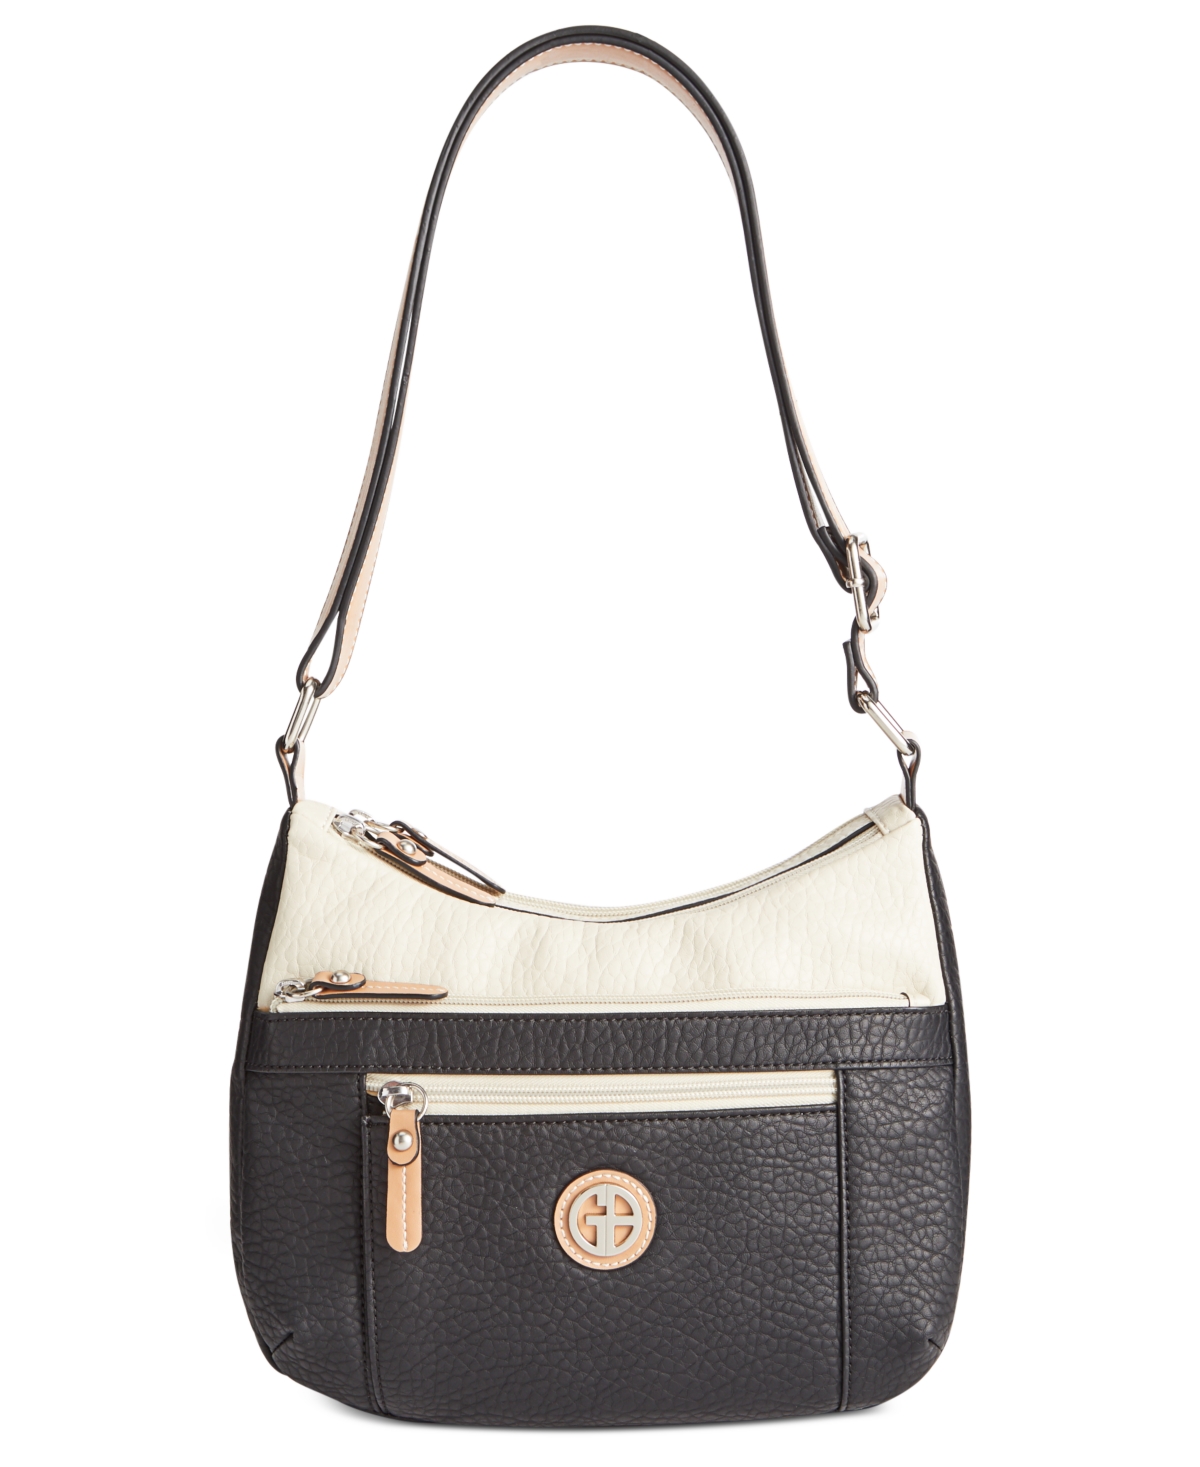 Colorblock Pebble Hobo, Created for Macy's - Black/Ivory/Silver